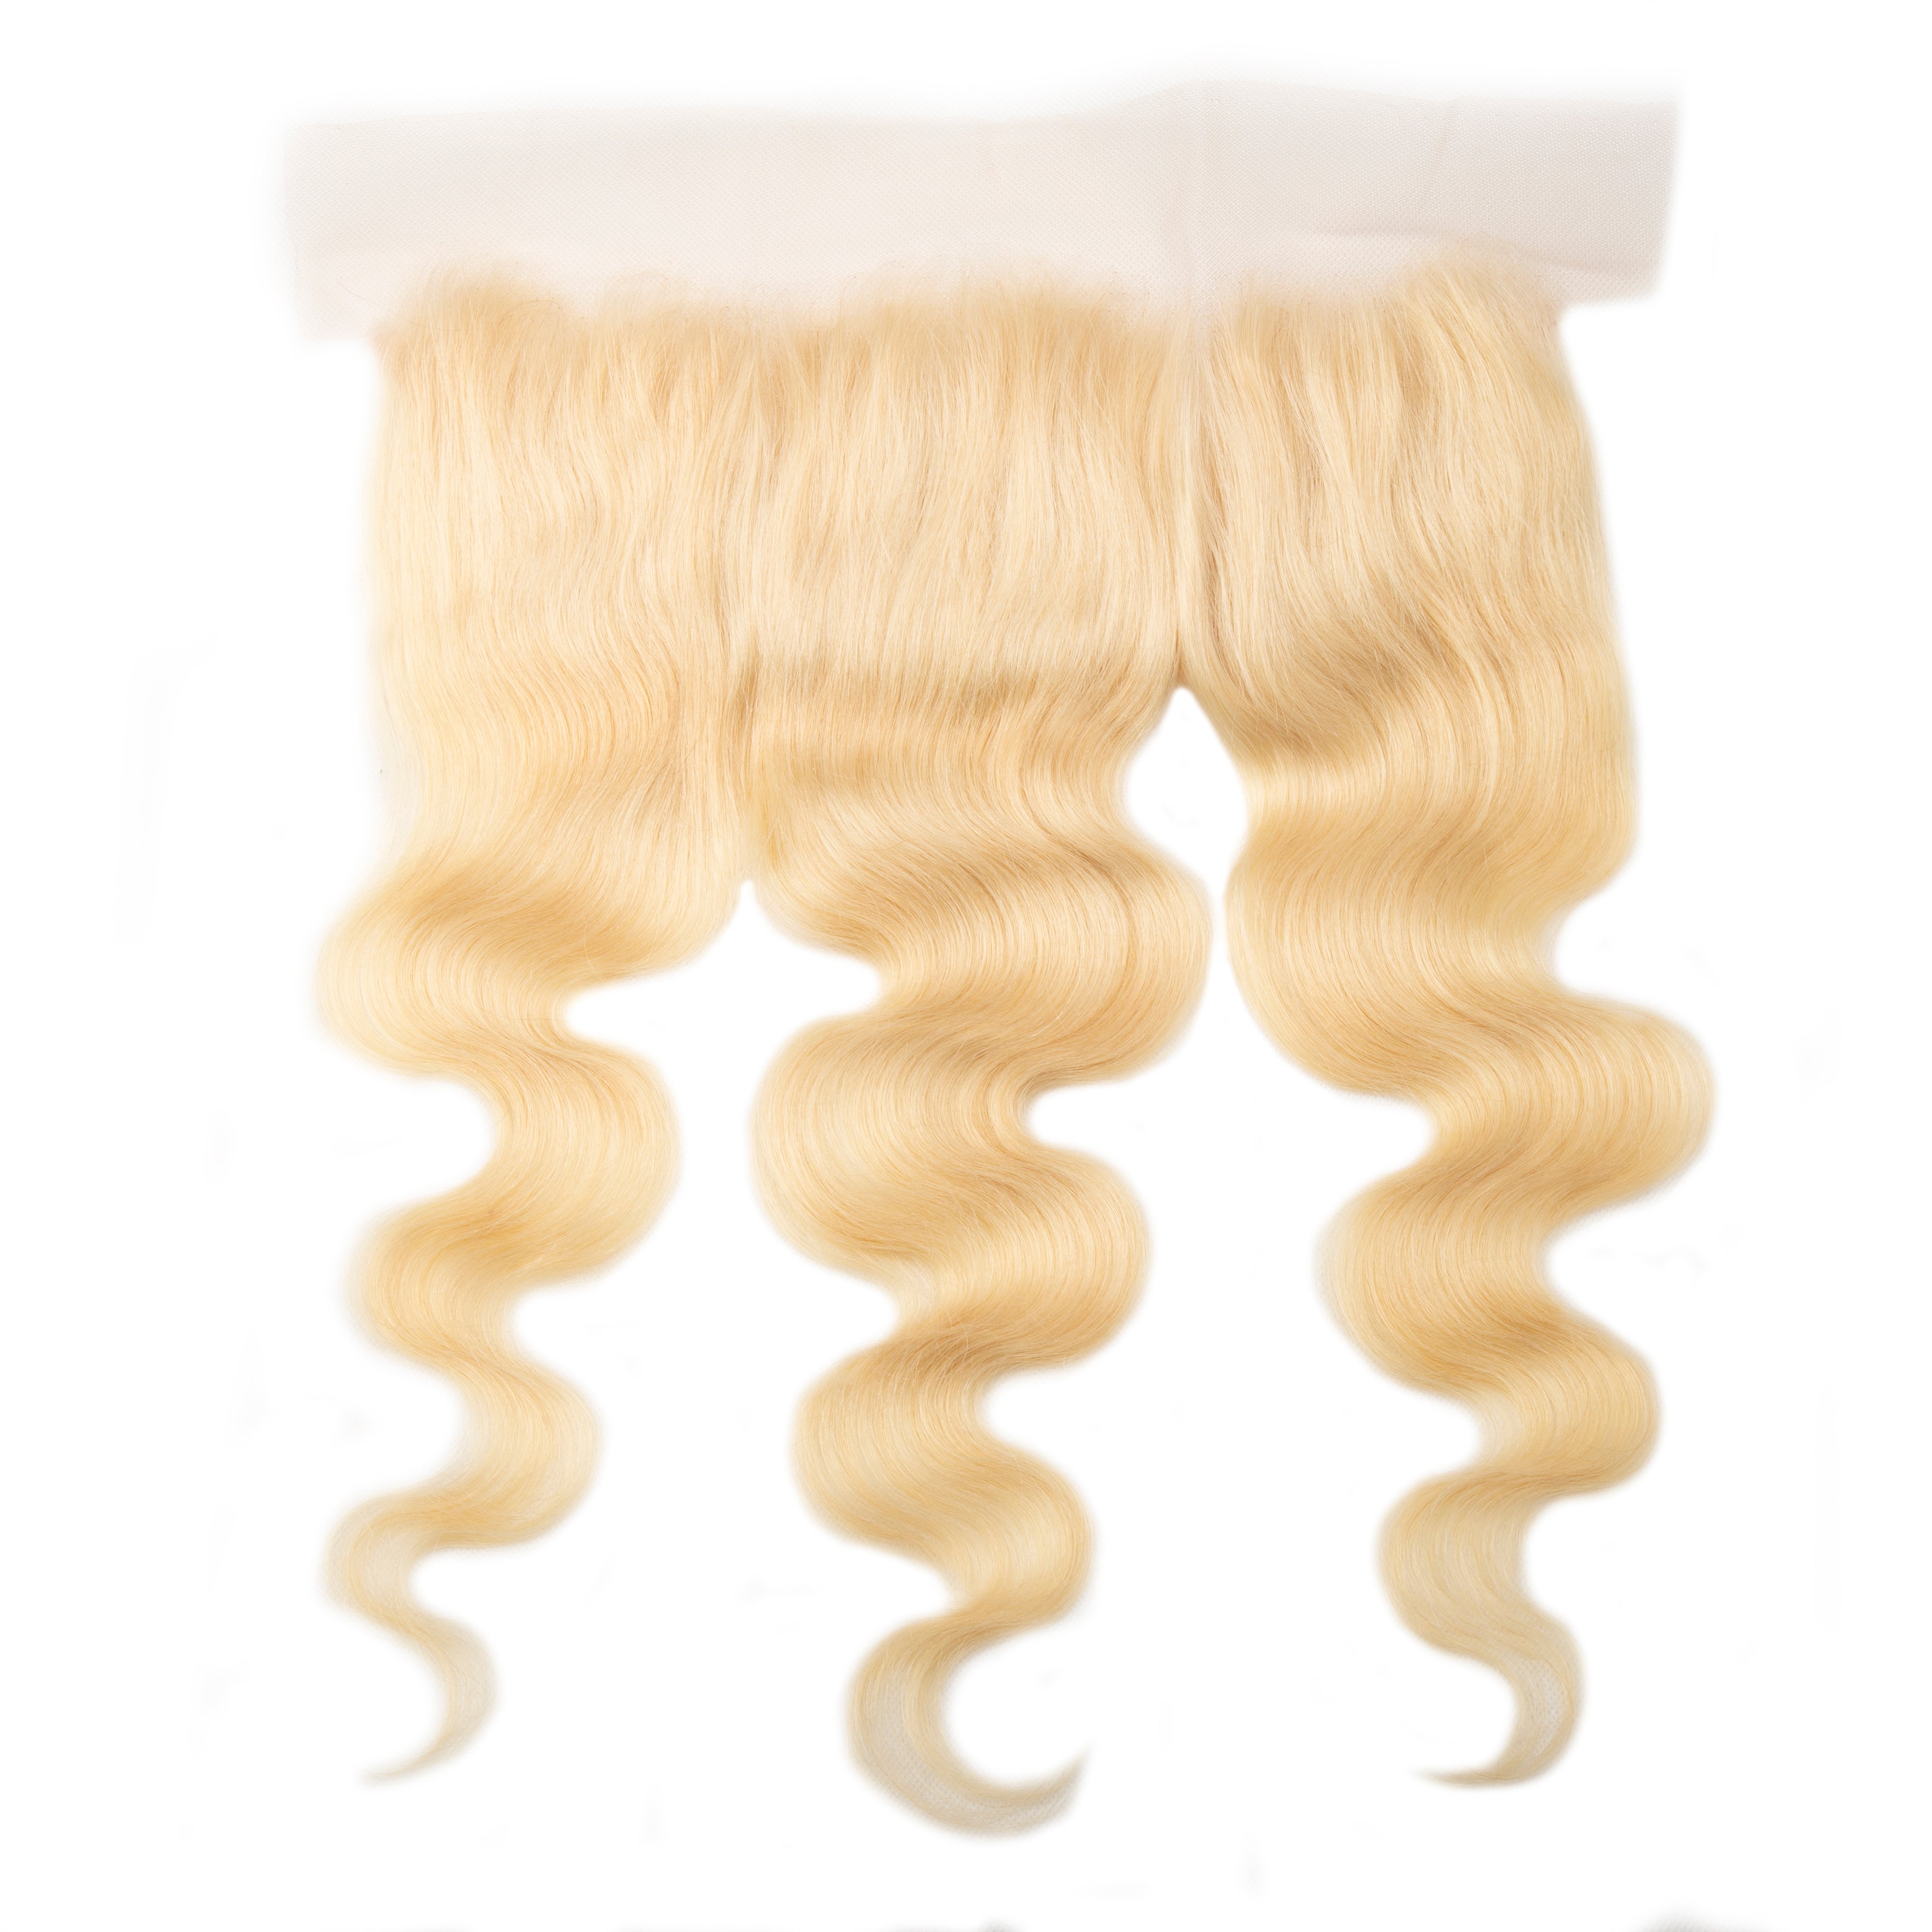 XBL Hair #613 Blonde 13x4 Transparent Lace Frontal Body Wave